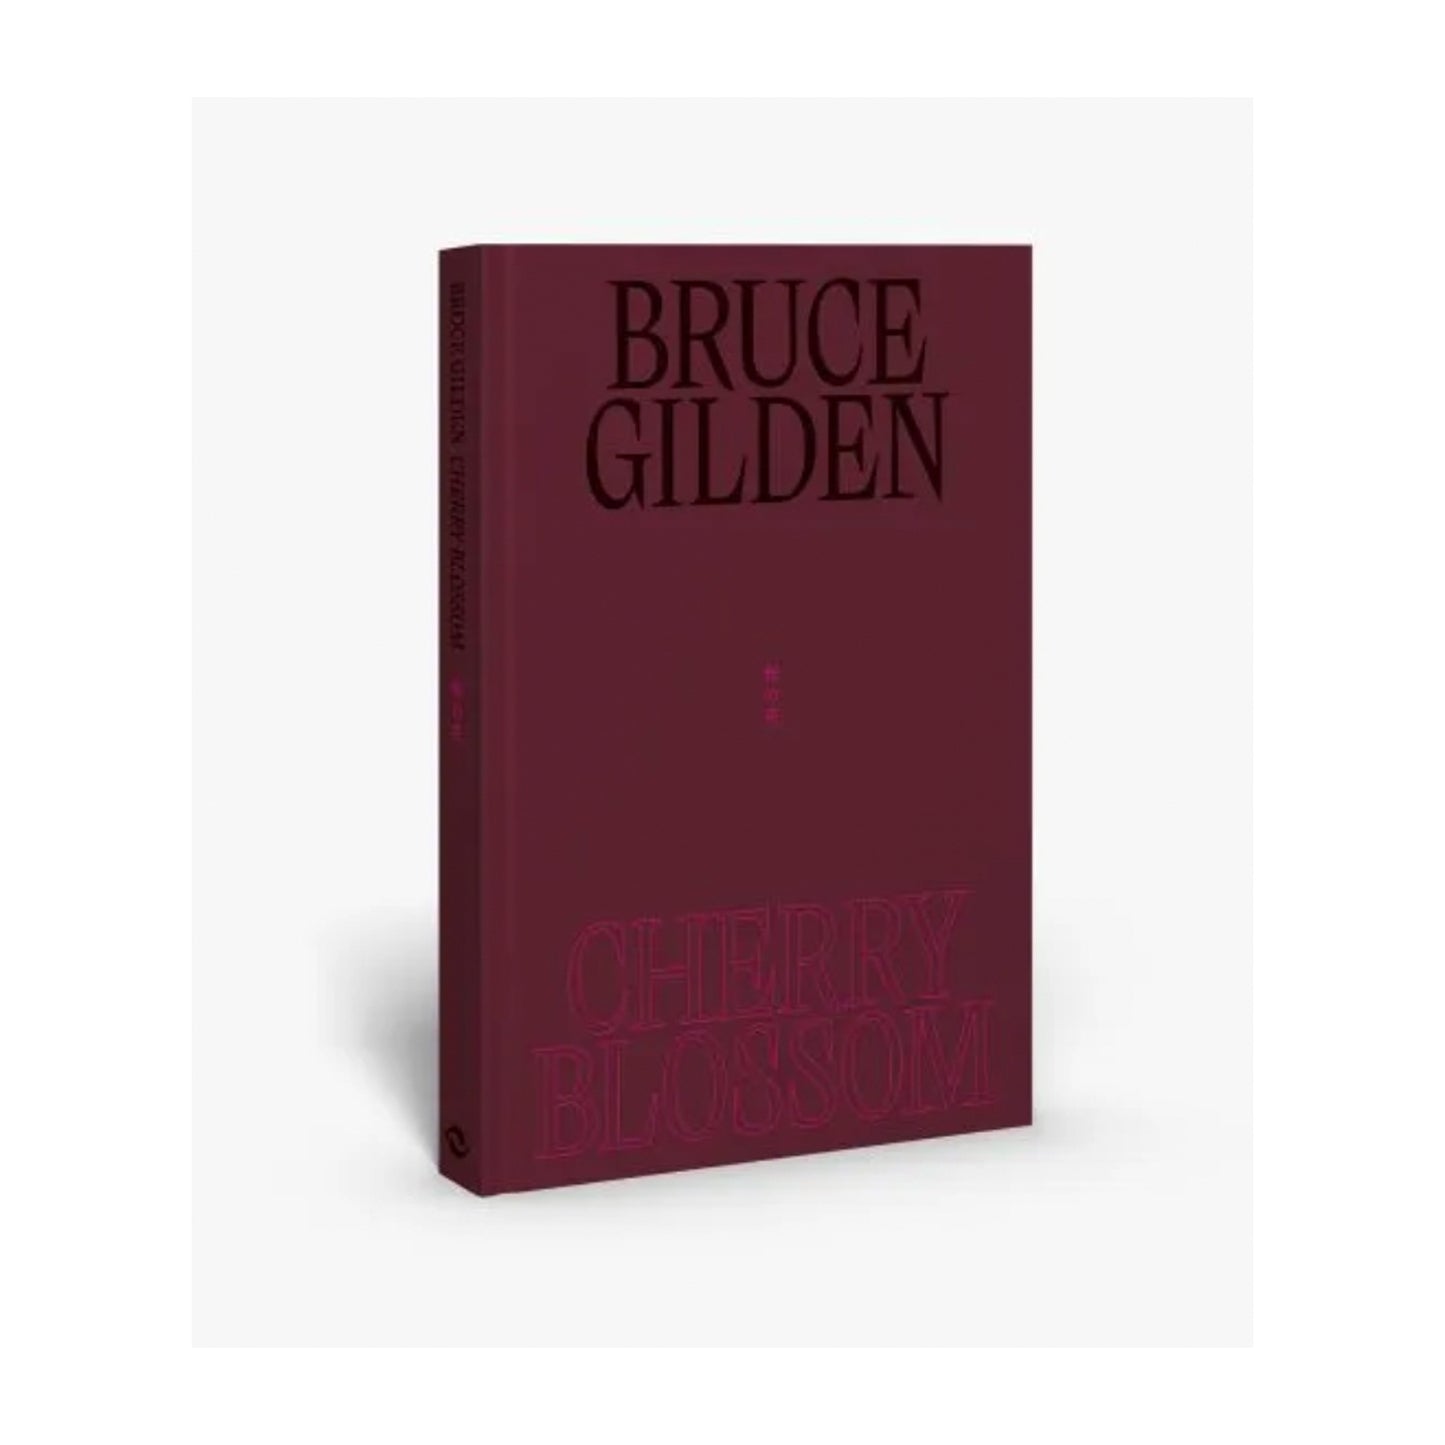 Cherry Blossom (Signed Copy) by Bruce Gilden